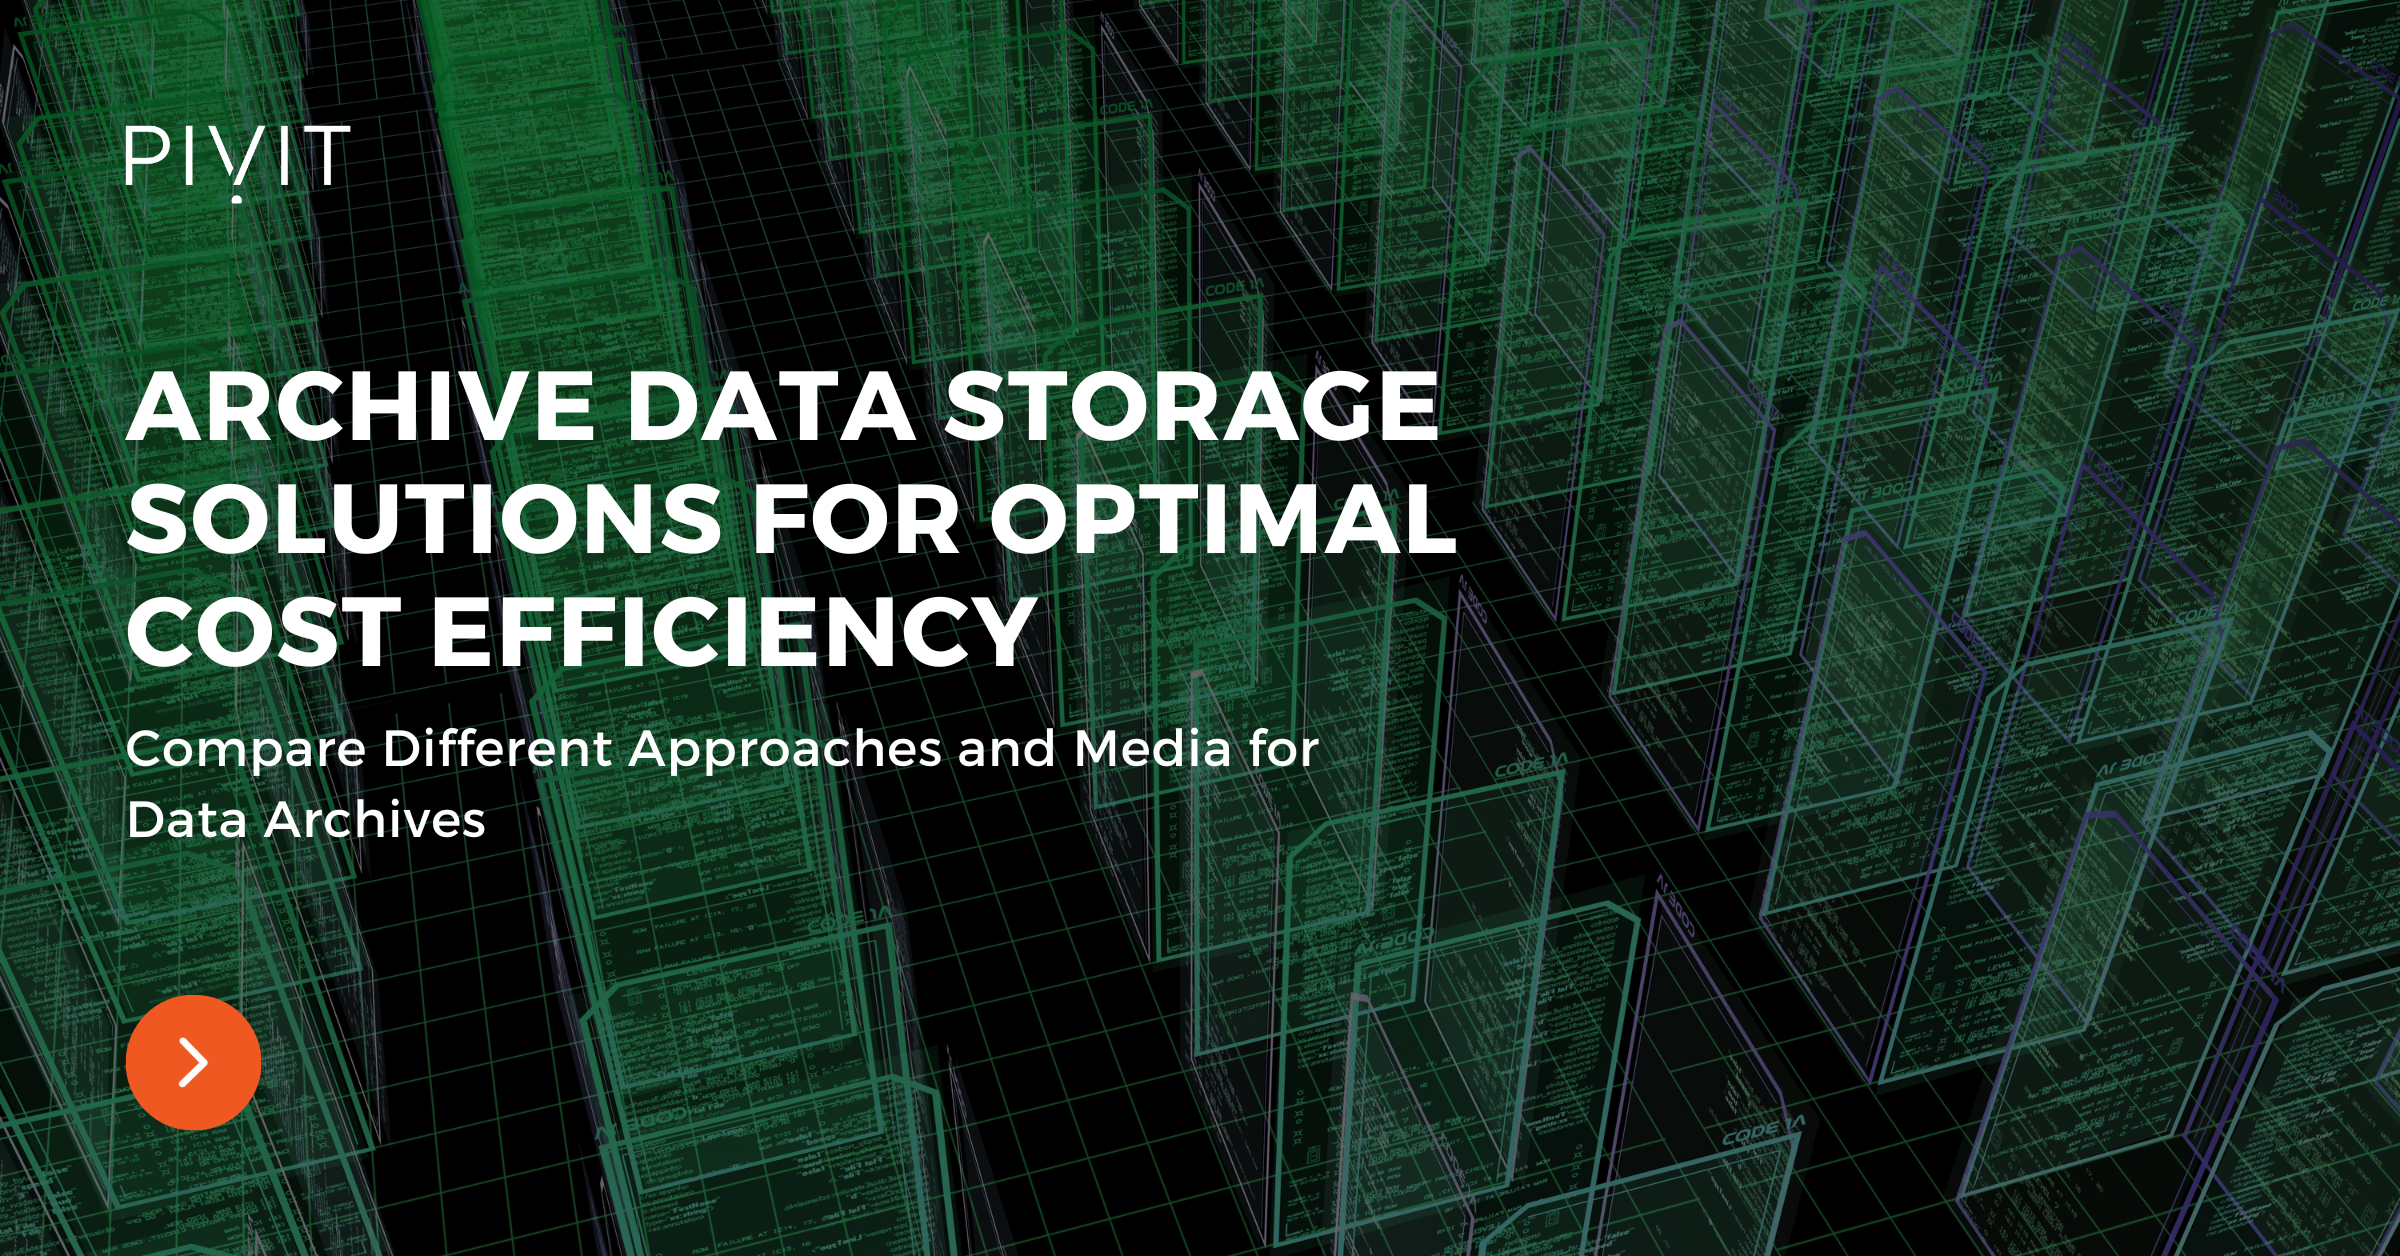 Archive Data Storage Solutions for Optimal Cost Efficiency - Compare Different Approaches and Media for Data Archives